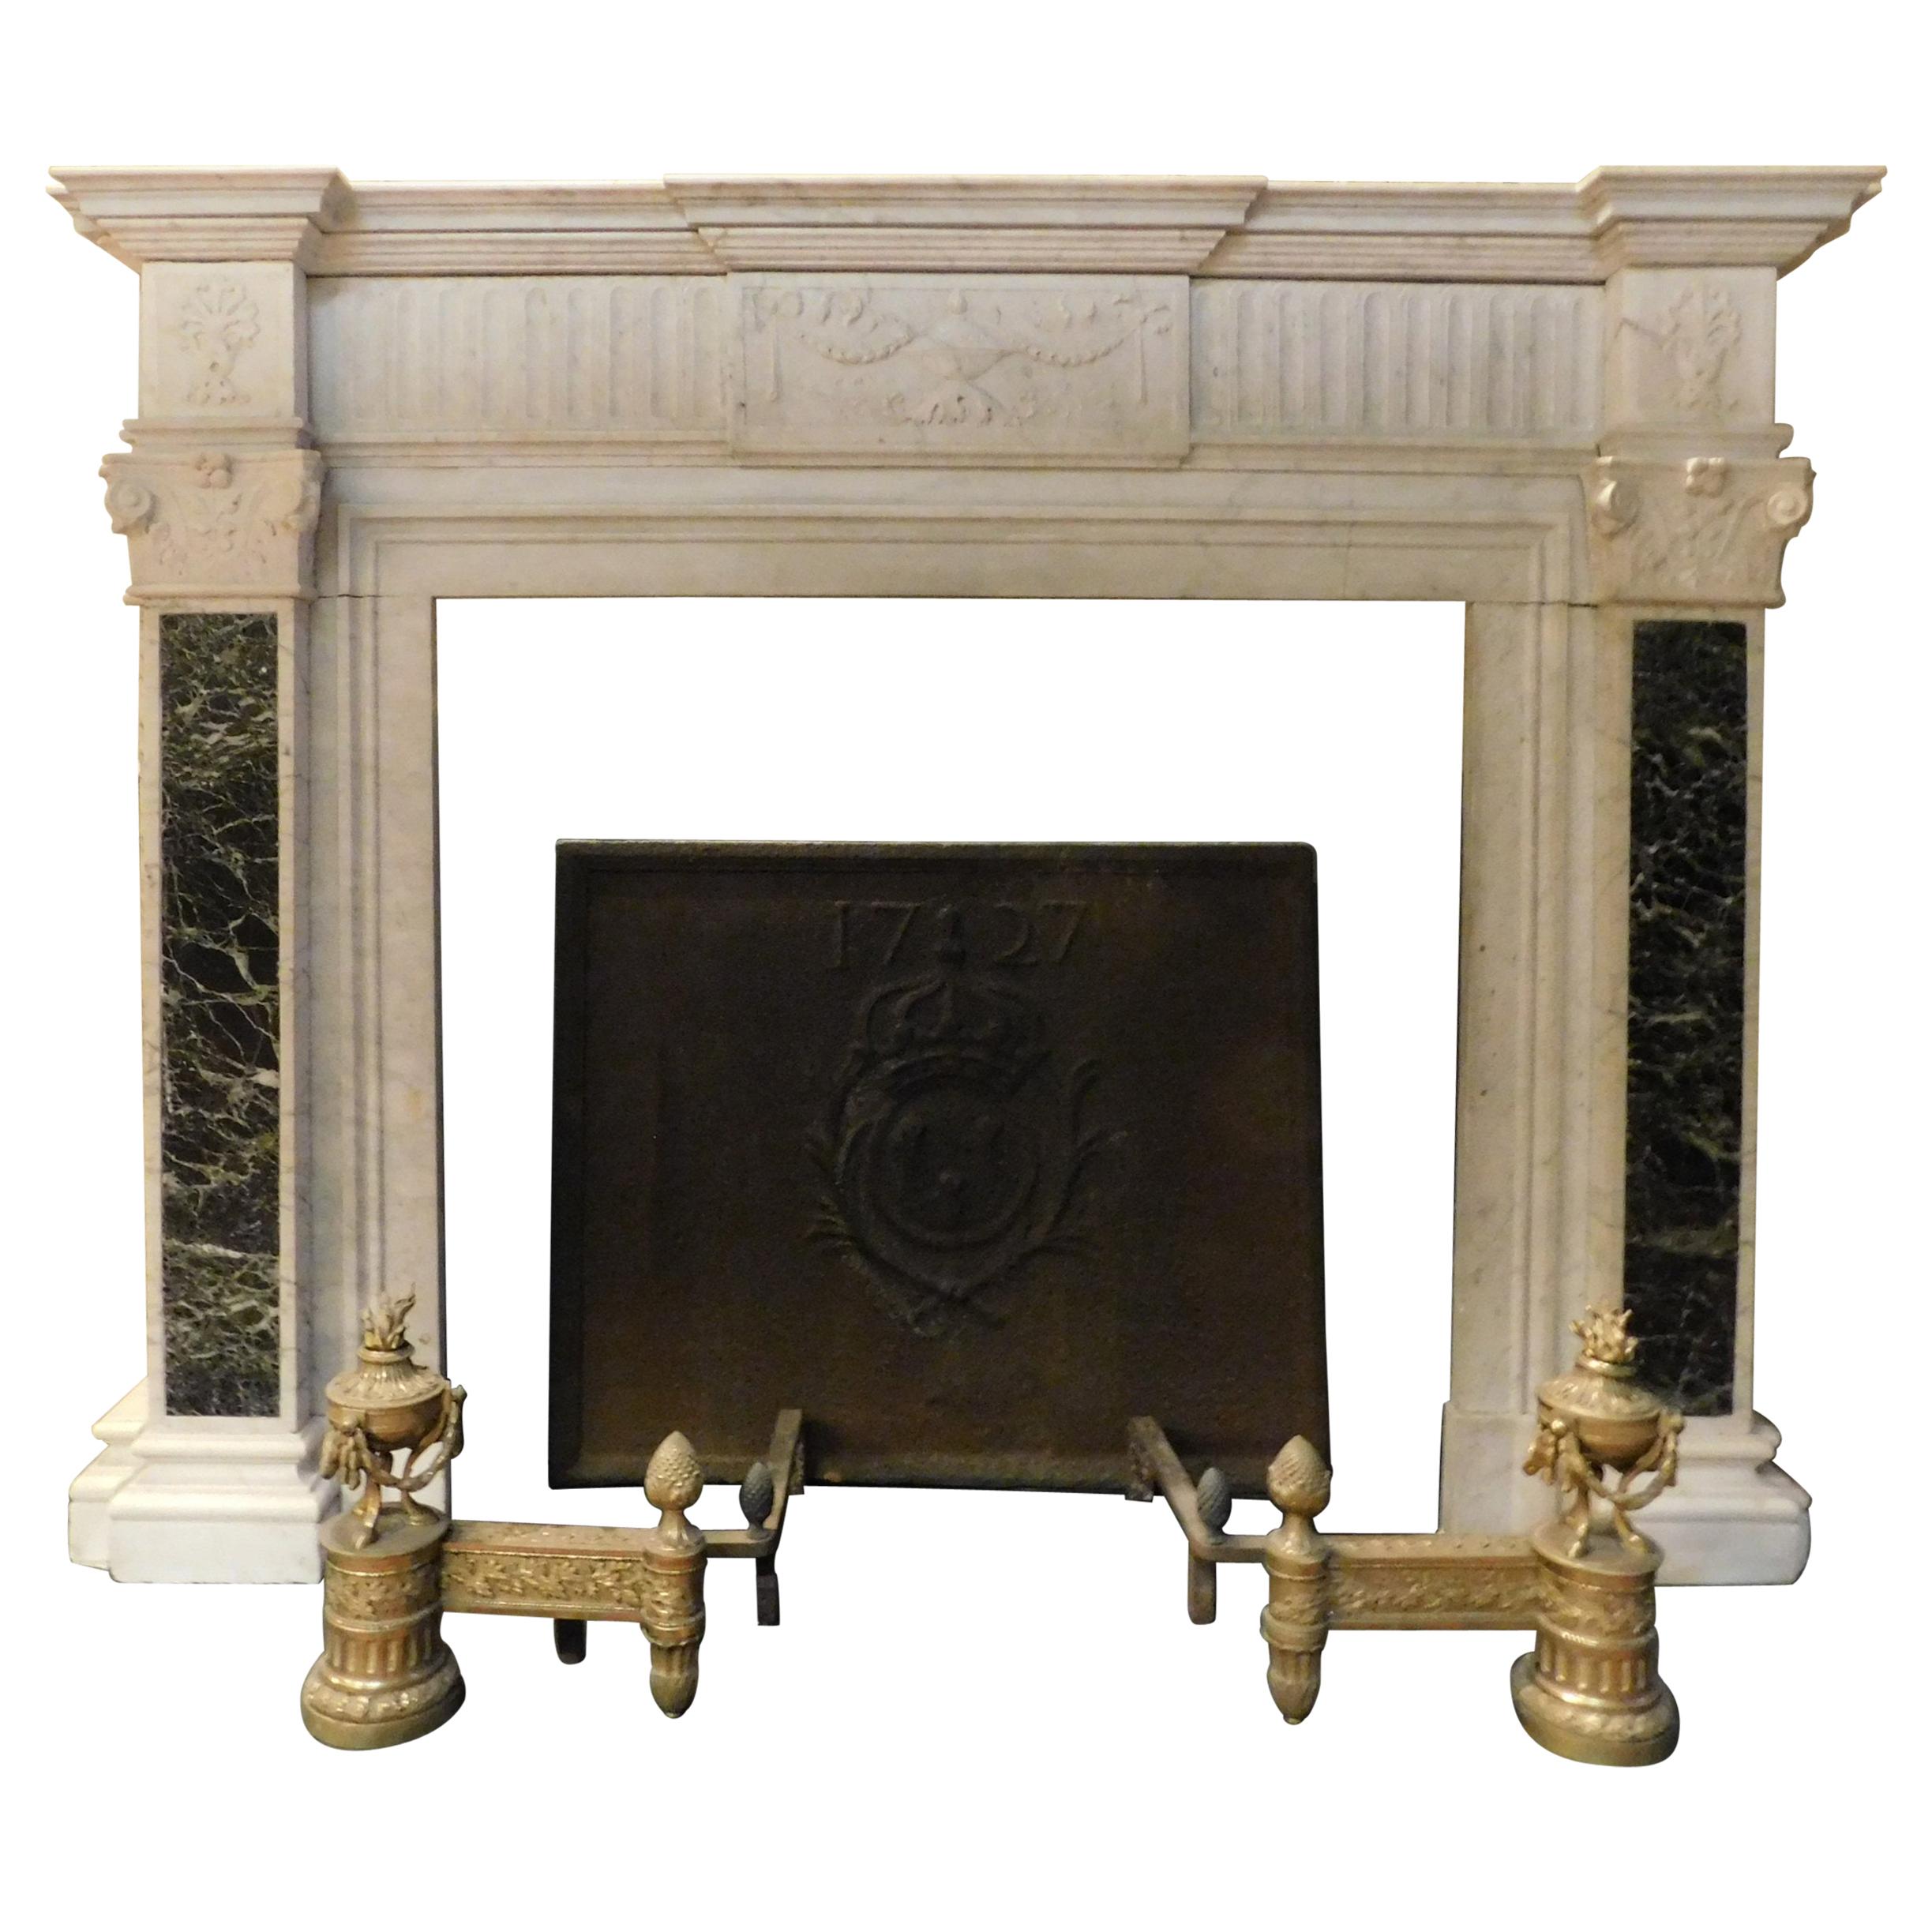 Antique Fireplace Mantel in White Carrara Marble, Verde Alpi Marble Inlays, 1700